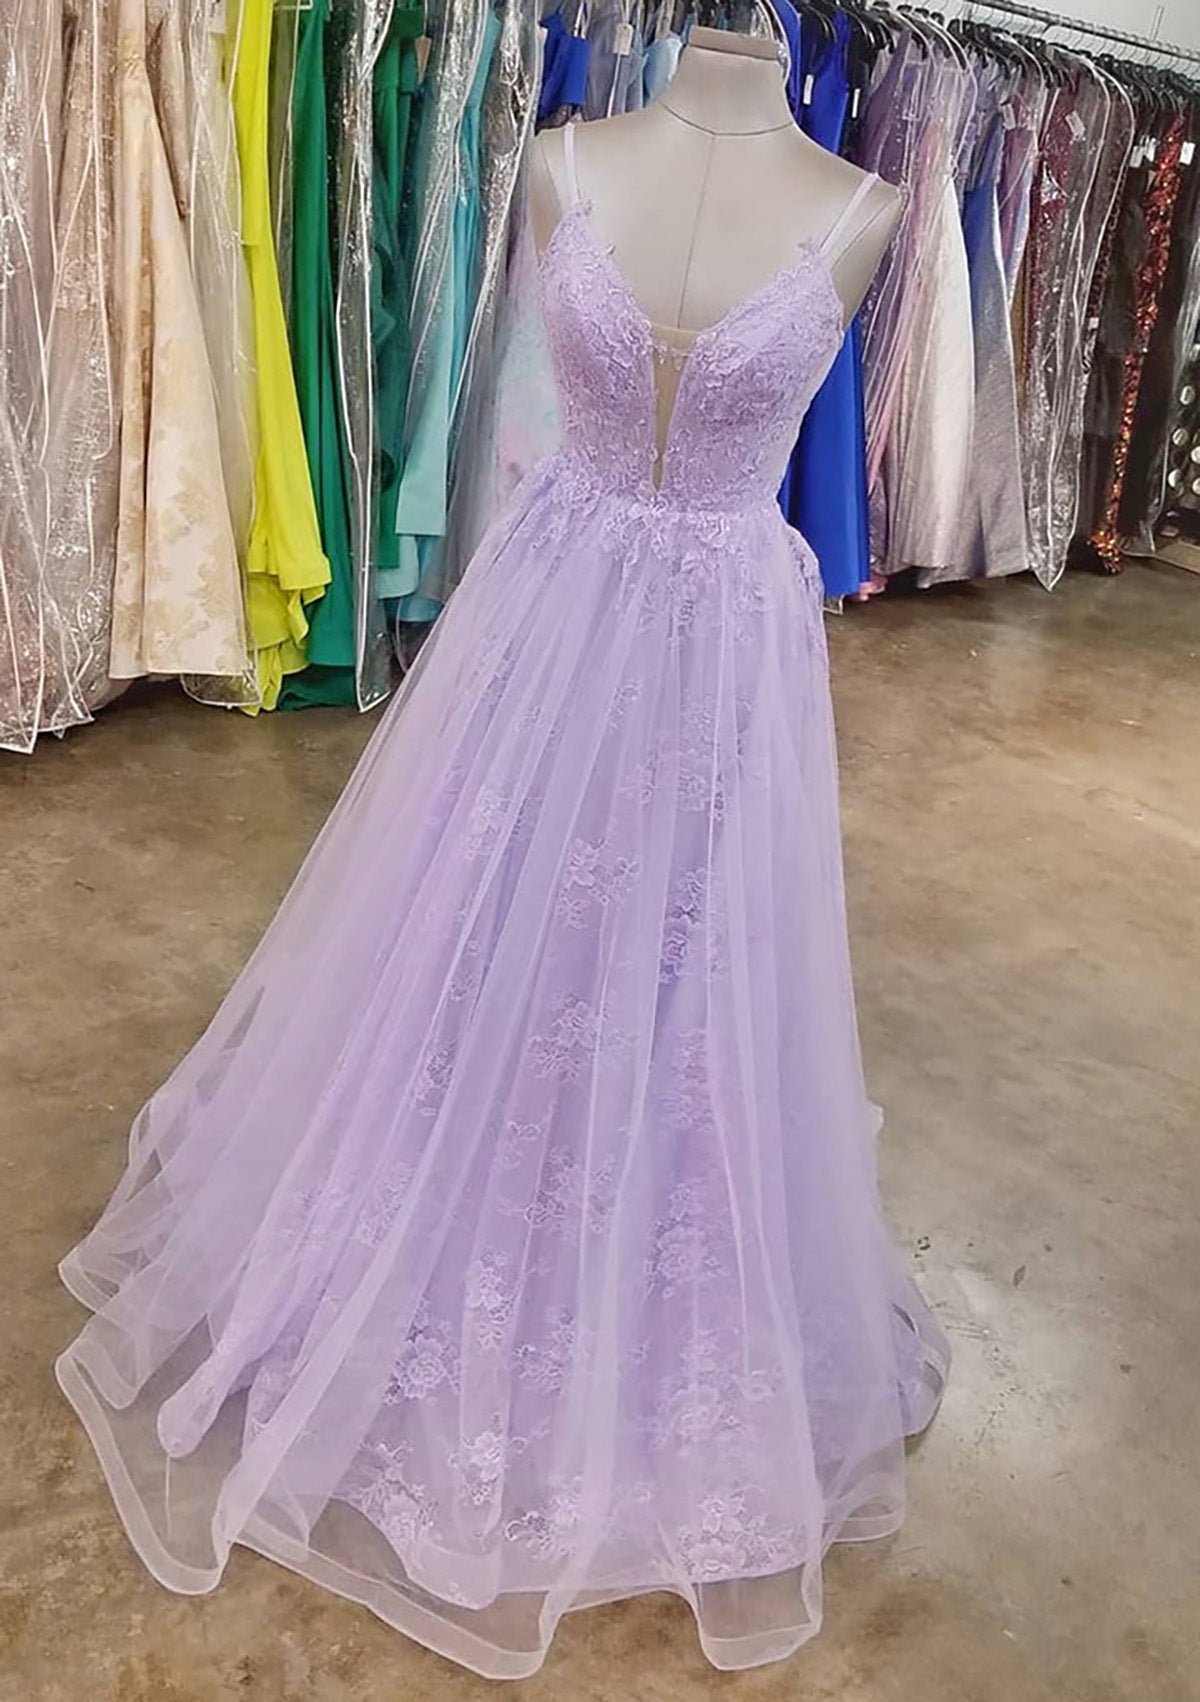 Lilac Corset Prom Dresses, A-line V Neck Spaghetti Straps Long/Floor-Length Lace Tulle Corset Prom Dress outfits, Lilac Prom Dresses